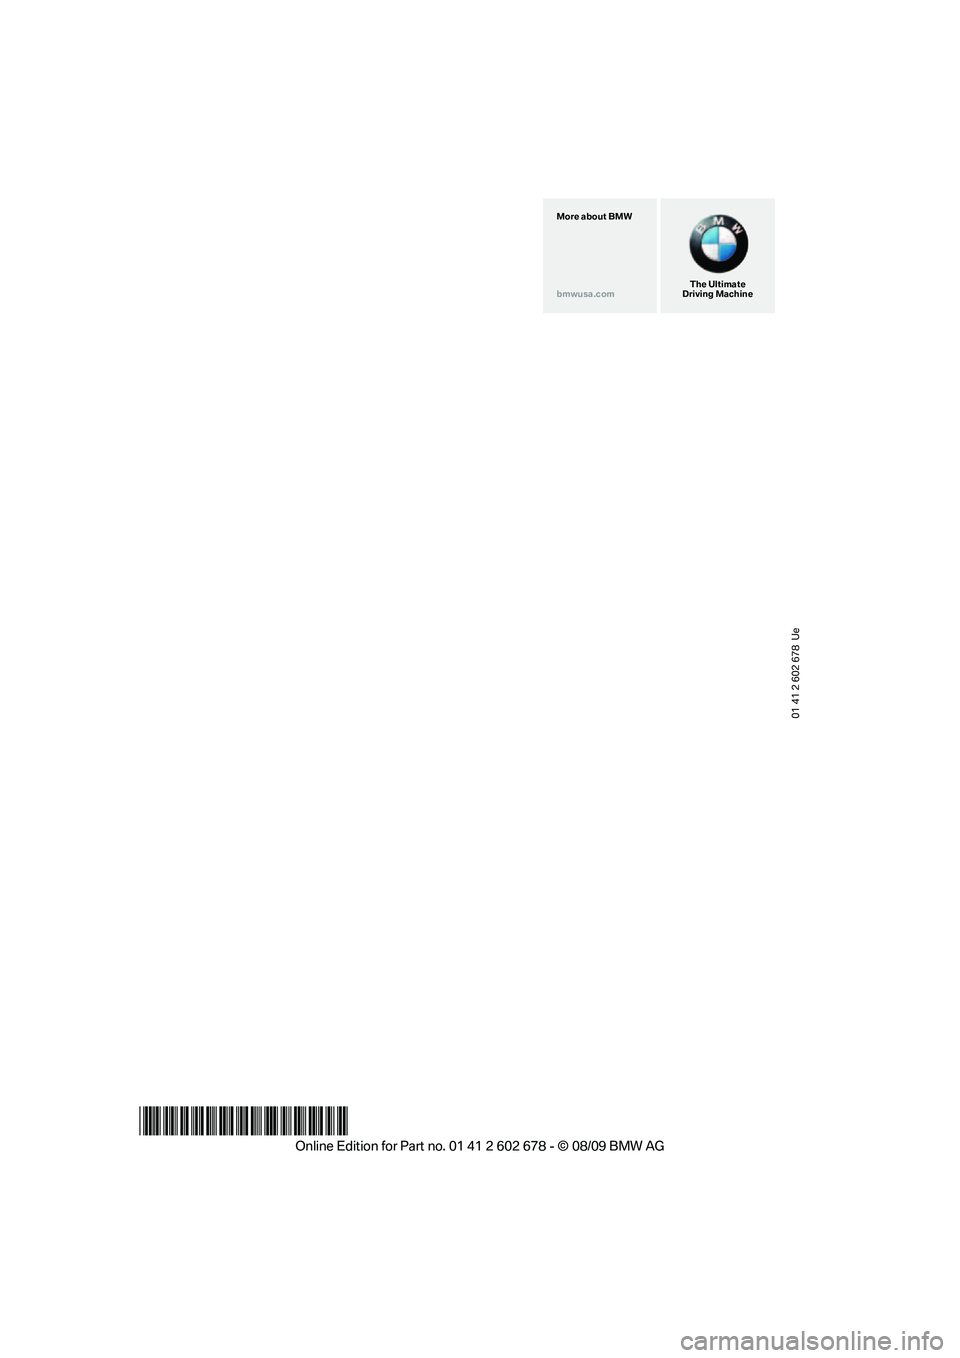 BMW 535I 2010  Owners Manual 01 41 2 602 678  Ue
*BL2602678009*
The Ultimate
Driving Machine More about BMW
bmwusa.com 